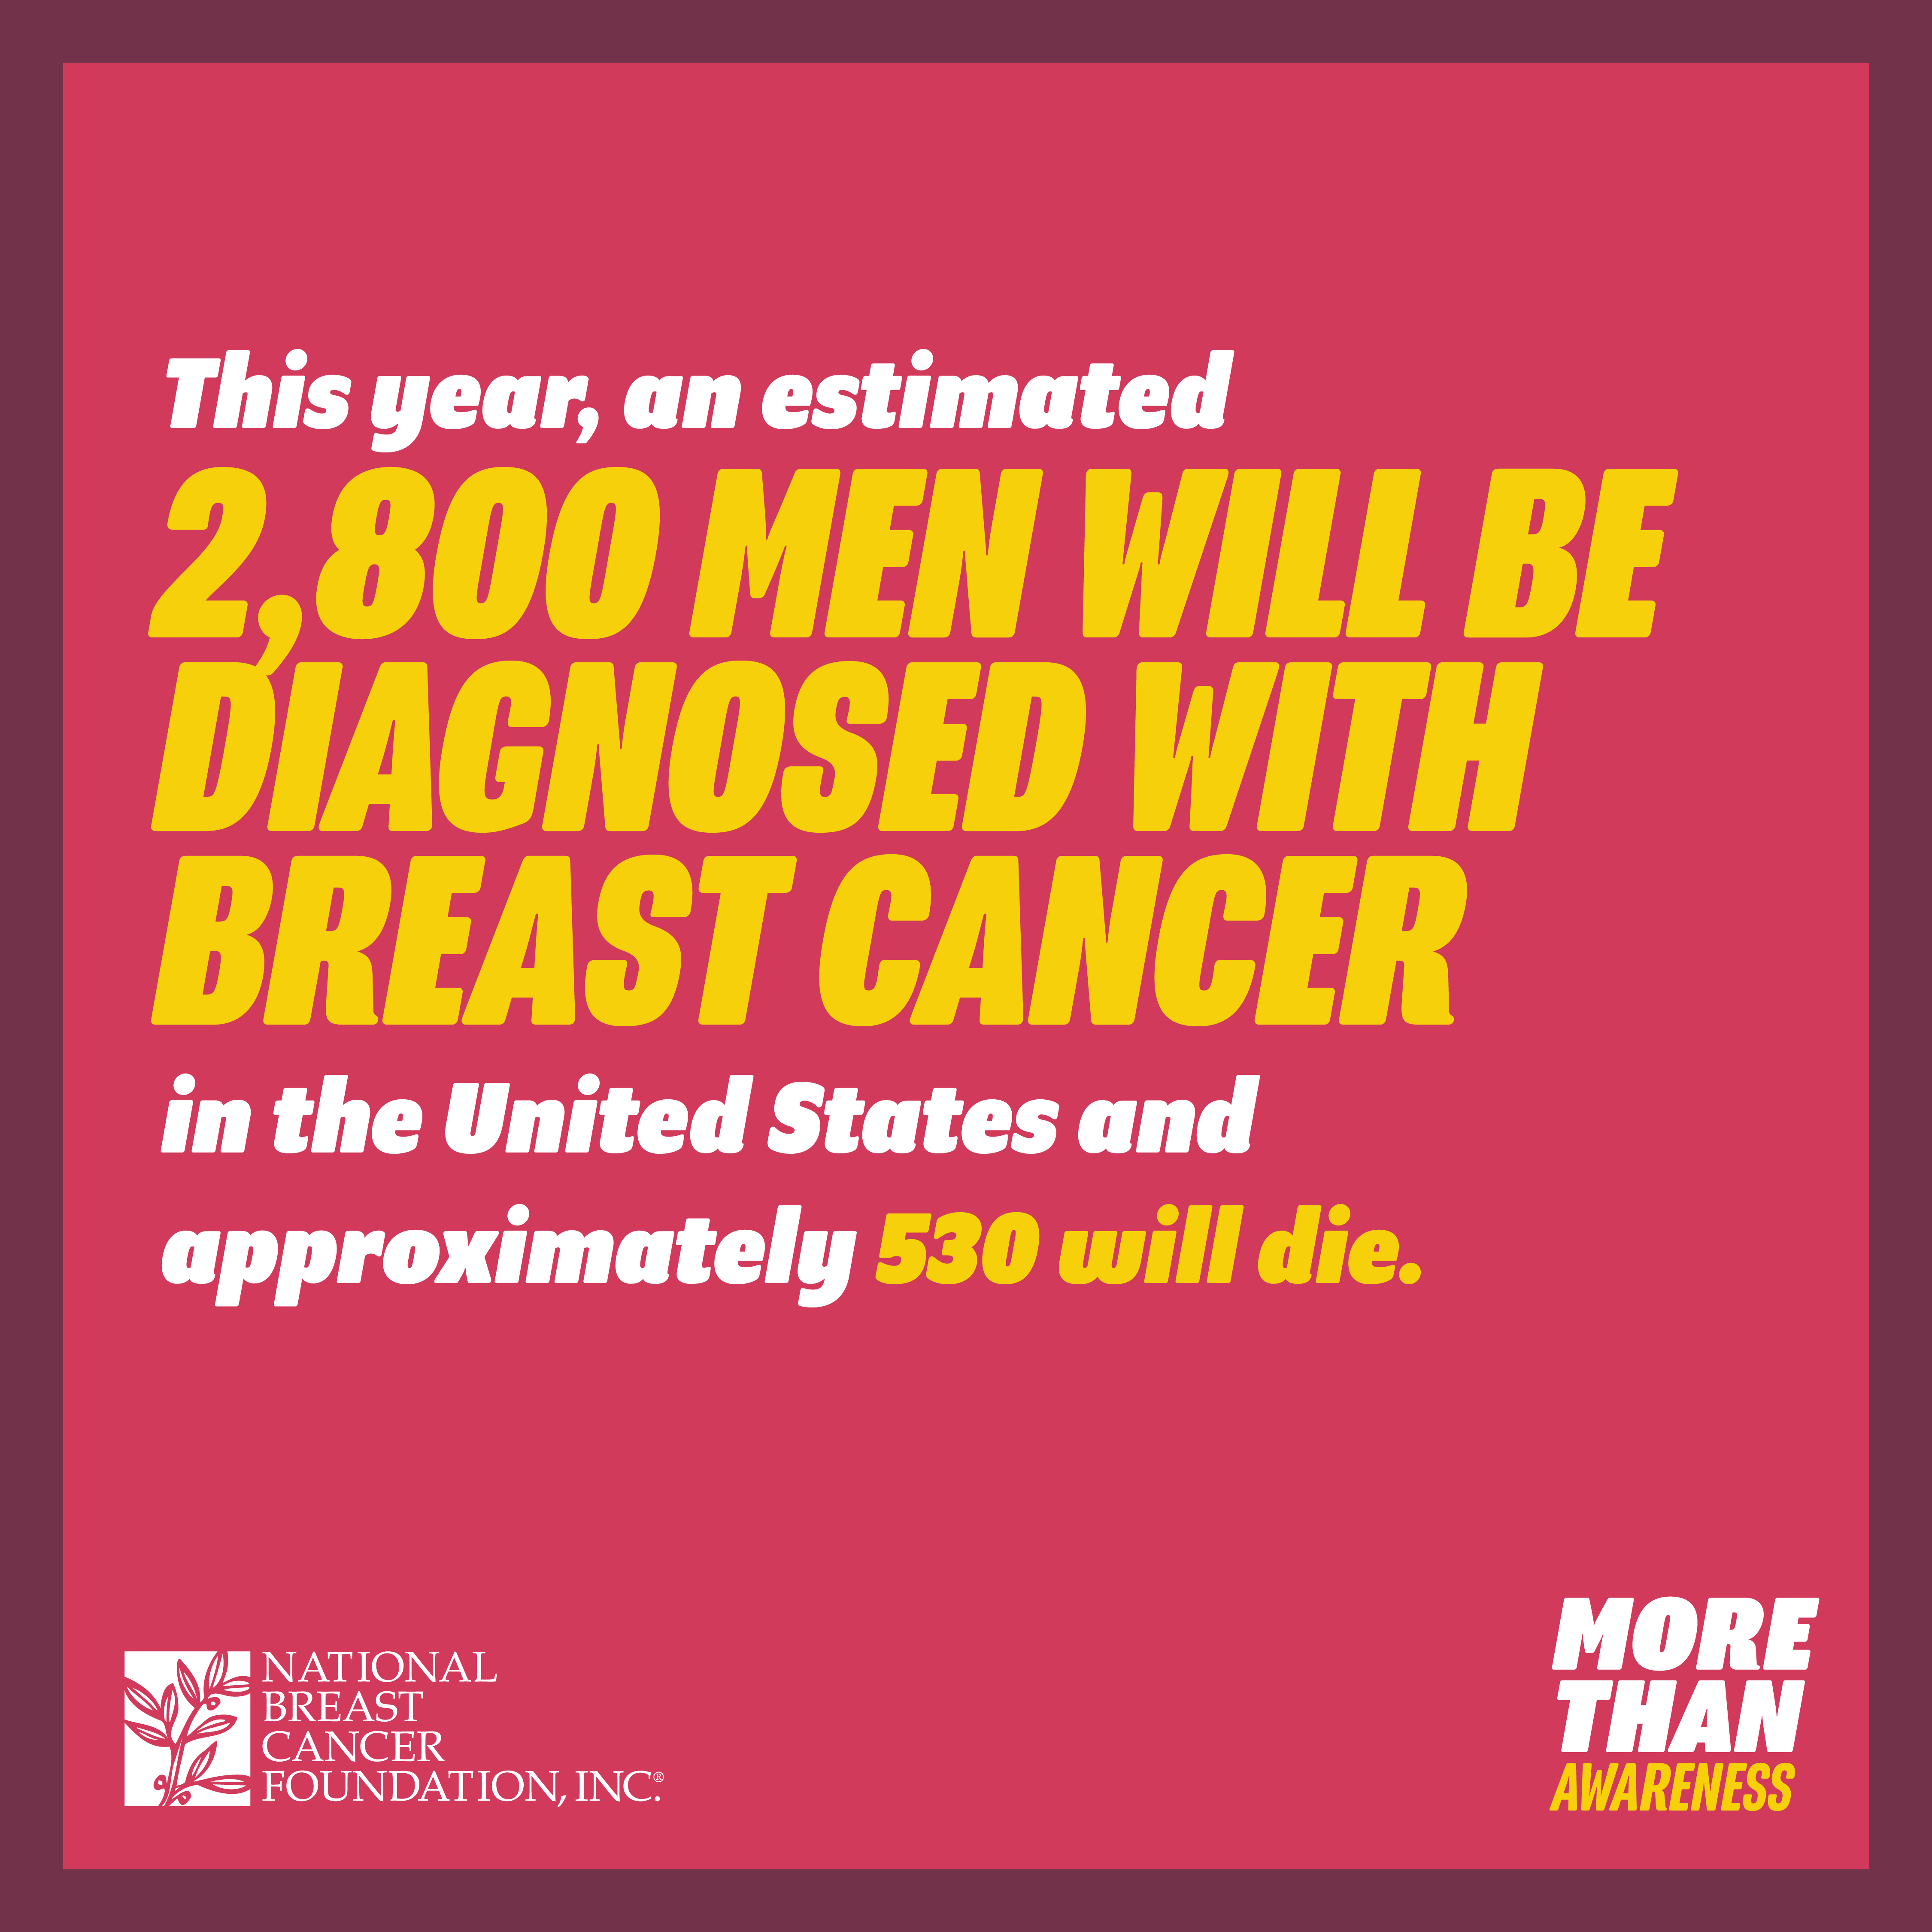 About 2,710 men will be diagnosed with breast cancer in the United States, approximately 530 will die